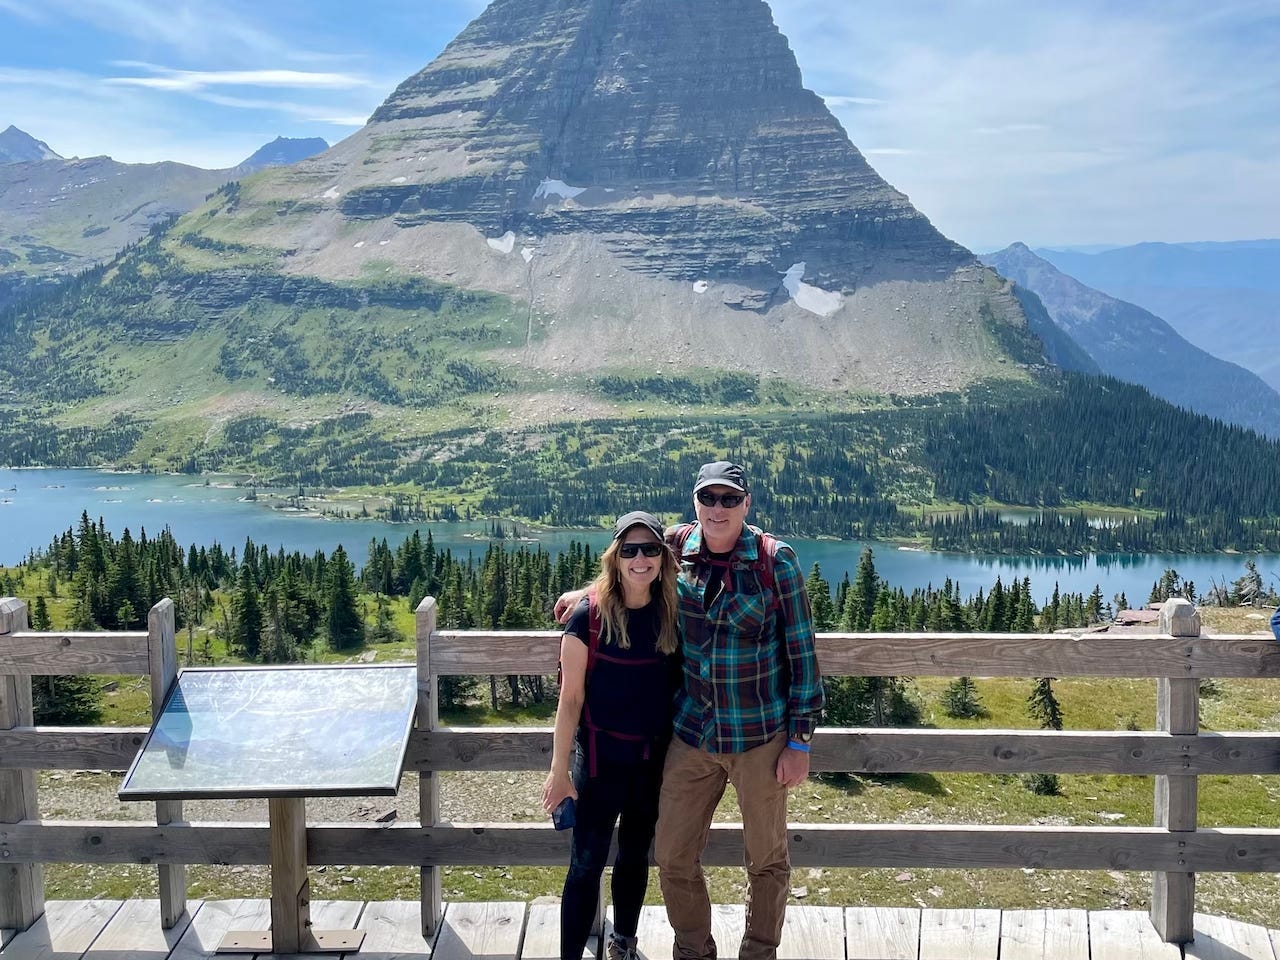 <ul class="summary-list"><li>A Gen X couple who has been to all 63 national parks says some are better than others in the summer.</li><li>Matt and Karen Smith would avoid parks like Death Valley because of killer summer temperatures.</li><li>The best to visit in the summer are high alpine national parks.</li></ul><p>There are <a href="https://www.businessinsider.com/best-worst-national-parks-usa-from-man-visited-each-one-2024-4">63 national parks</a> in the US, but according to <a href="https://www.businessinsider.com/biggest-mistakes-tourists-make-visiting-national-parks-2024-4">a couple who have been to all of them</a>, not every park is a summer destination.</p><p>Matt and Karen Smith, both 63, told Business Insider they left their jobs in 2010 with the sole mission of visiting every US national park after being inspired by their friends Bob and Sue.</p><p>Since then, the couple has written several books about their national park experiences and shares their tips and tricks on an<a href="https://www.instagram.com/mattandkarensmith/?hl=en"> Instagram page</a> with over 247,000 followers as of May 2024 and on their podcast, <a href="https://www.thedearbobandsuepodcast.com/">"Dear Bob and Sue: A National Parks Podcast."</a></p><p><a href="https://www.nps.gov/orgs/1207/hidden-gems-off-season-trips-highlights-of-325-5-million-national-park-visits-in-2023.htm#:~:text=Today%2C%20the%20National%20Park%20Service,million%20or%204%25%20over%202022.">The National Parks Service reported</a> earlier this year that over 325 million people visited at least one national park last year, a 4% increase from the year prior.</p><p>With popularity close to an all-time high, here are eight parks the Smiths advise going to in the summer and two they'd recommend avoiding.</p><div class="read-original">Read the original article on <a href="https://www.businessinsider.com/best-worst-national-parks-summer-travel-according-to-experts-2024-5">Business Insider</a></div>